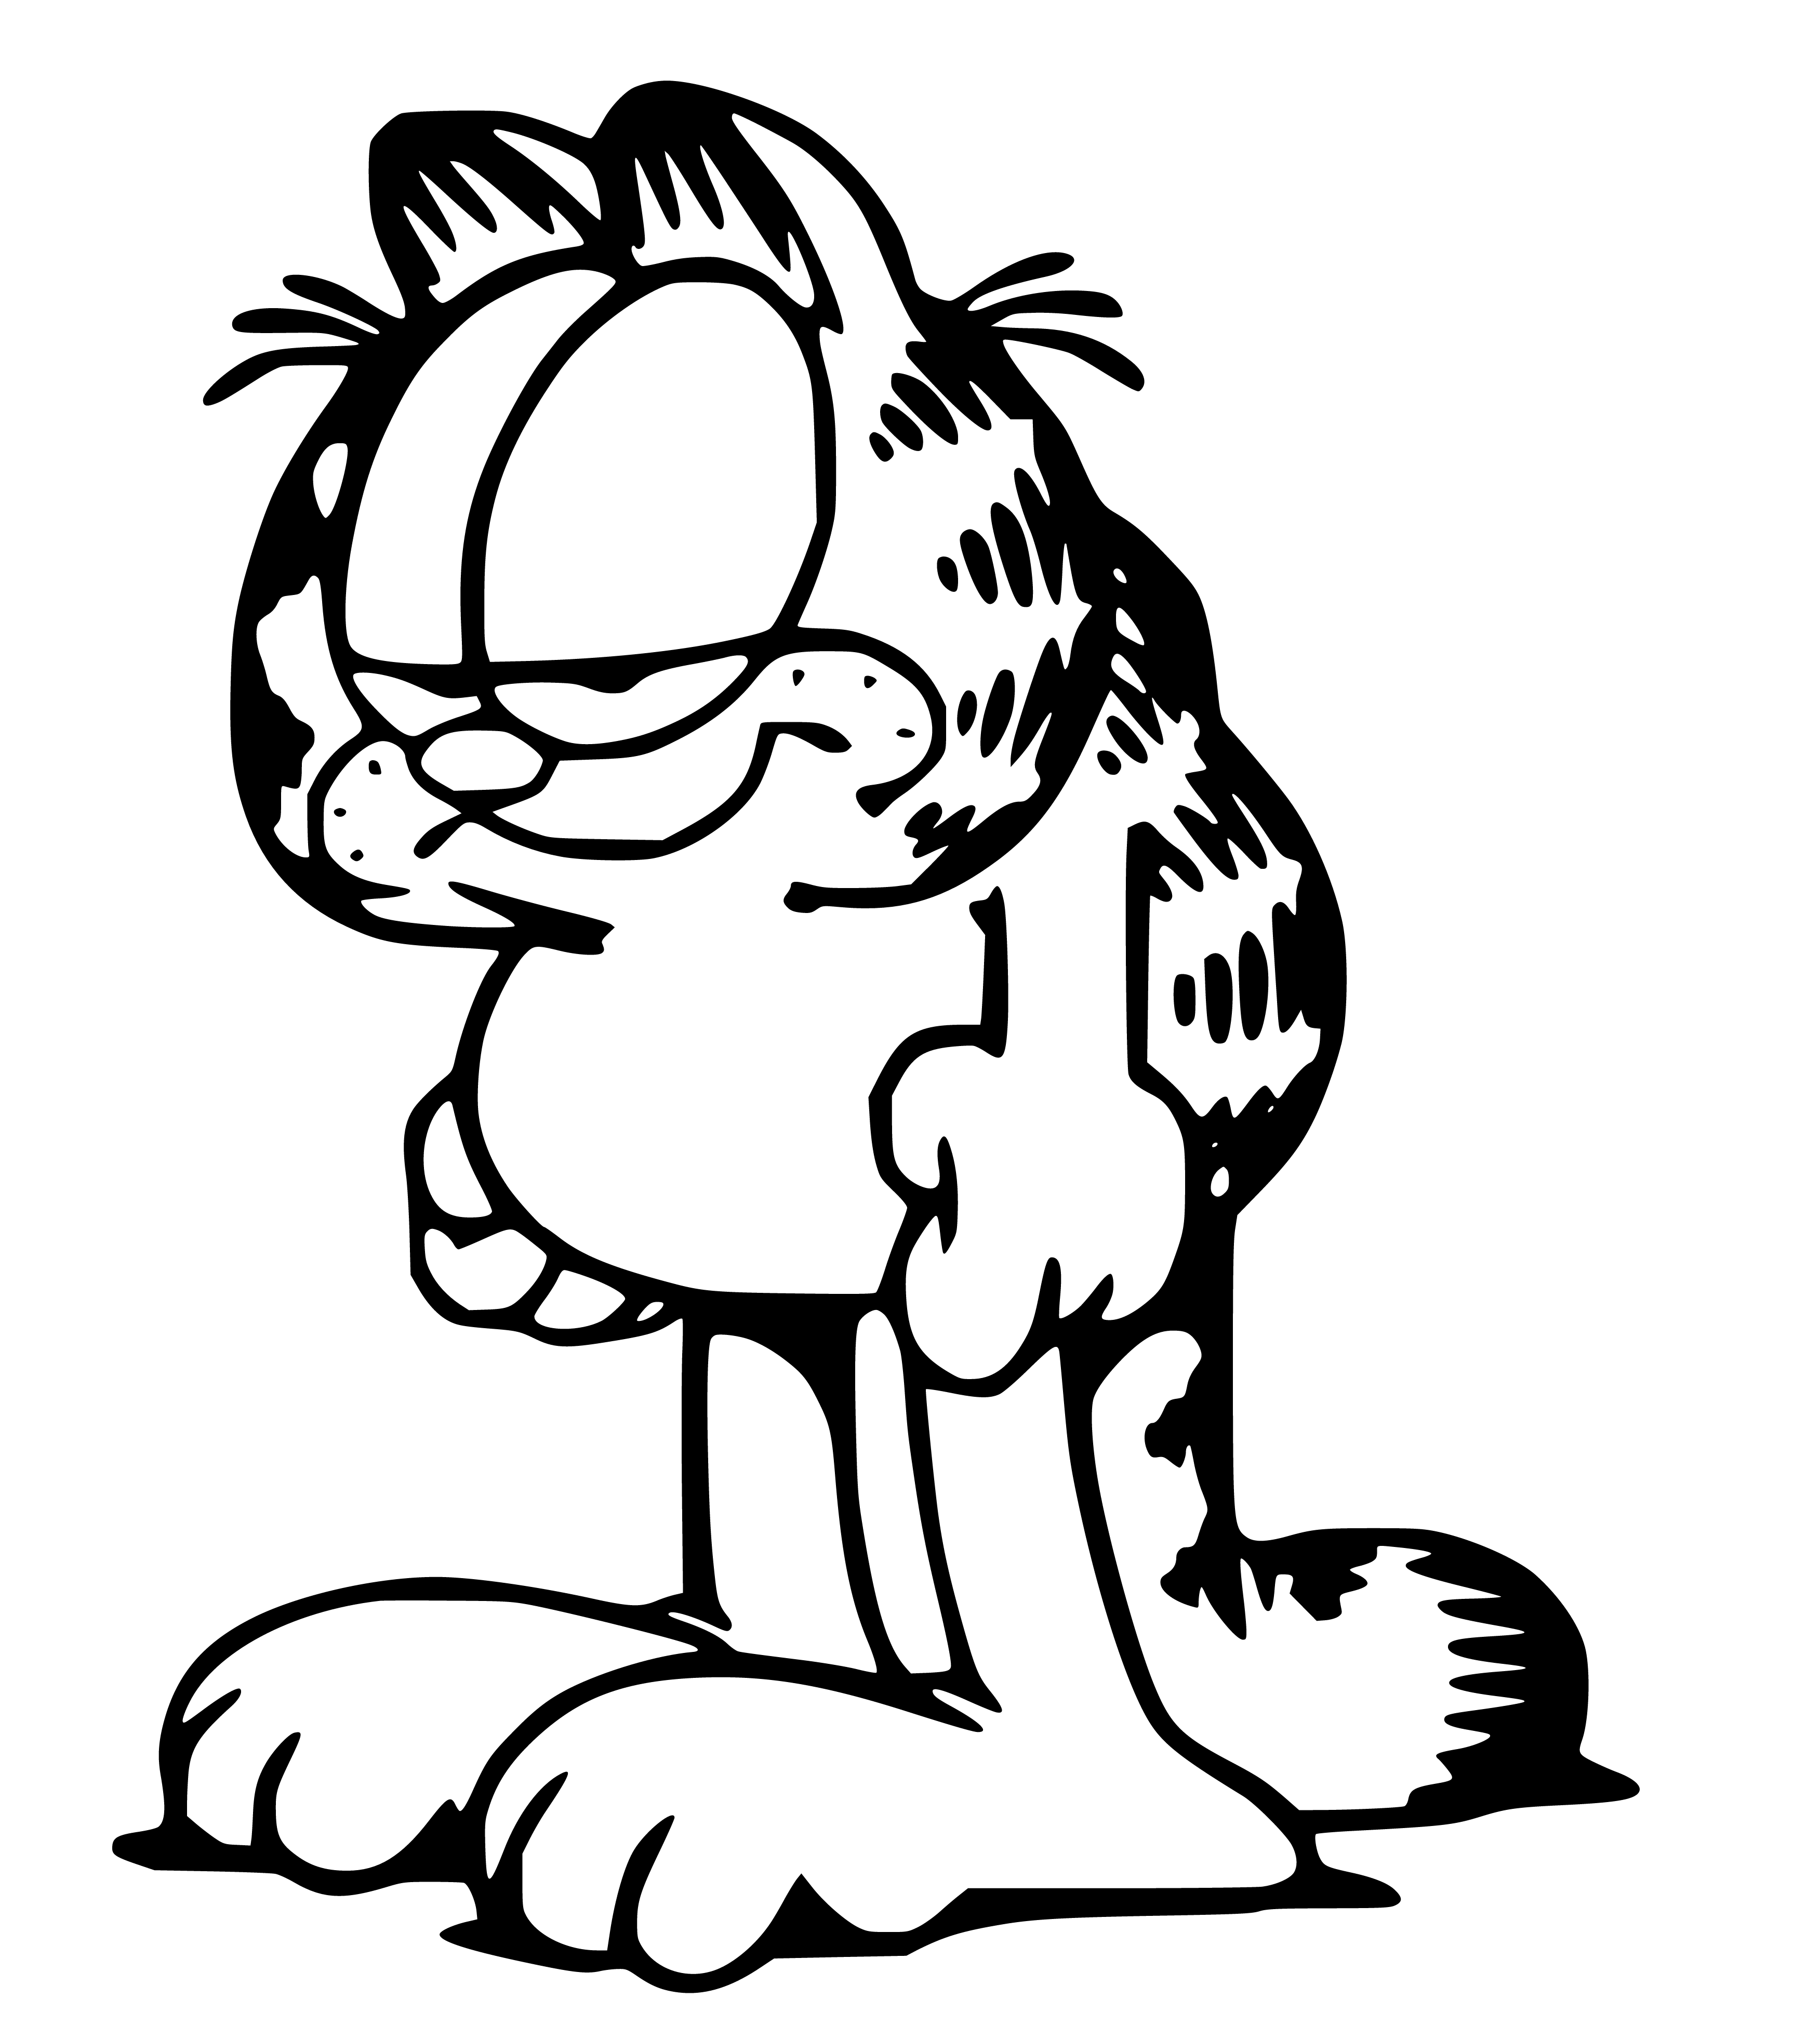 Printable Unhappy Garfield Coloring Page for kids.